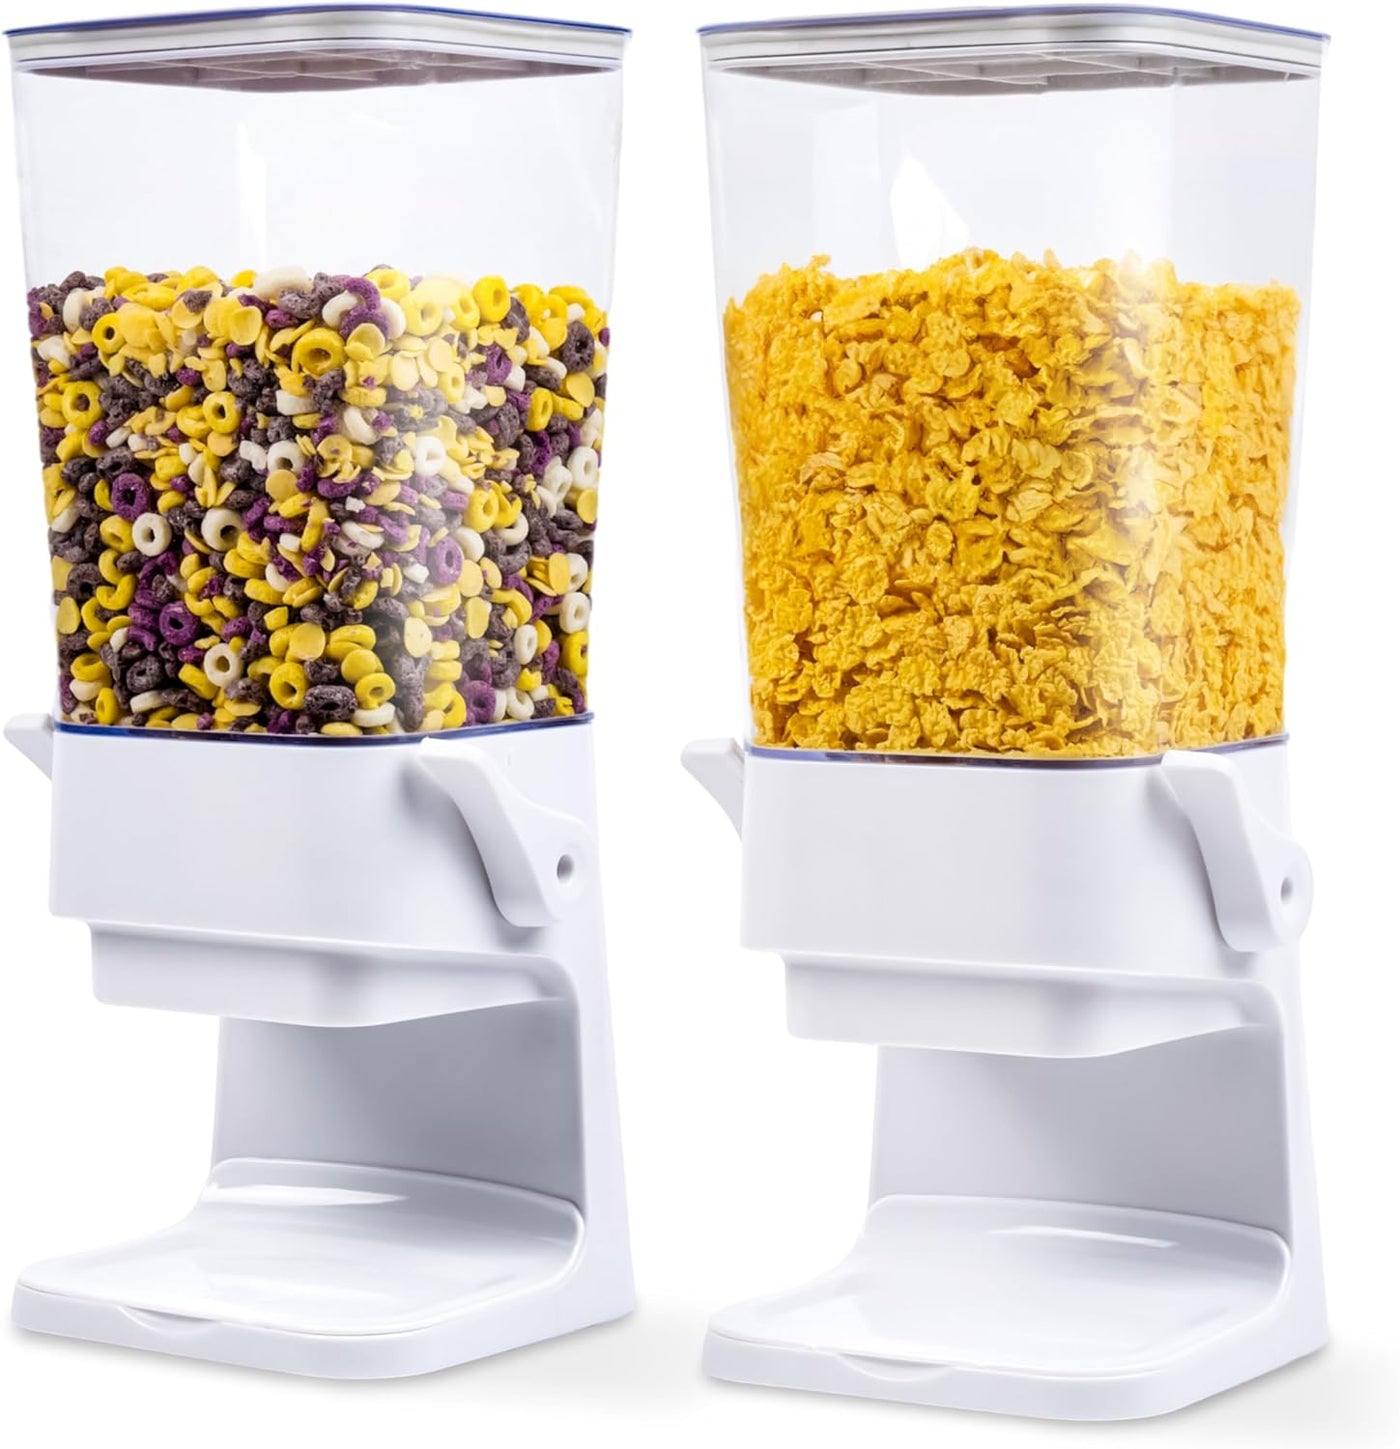 POWERLIX 2pc Cereal Dispenser Countertop (5.5 L), Cereal Storage